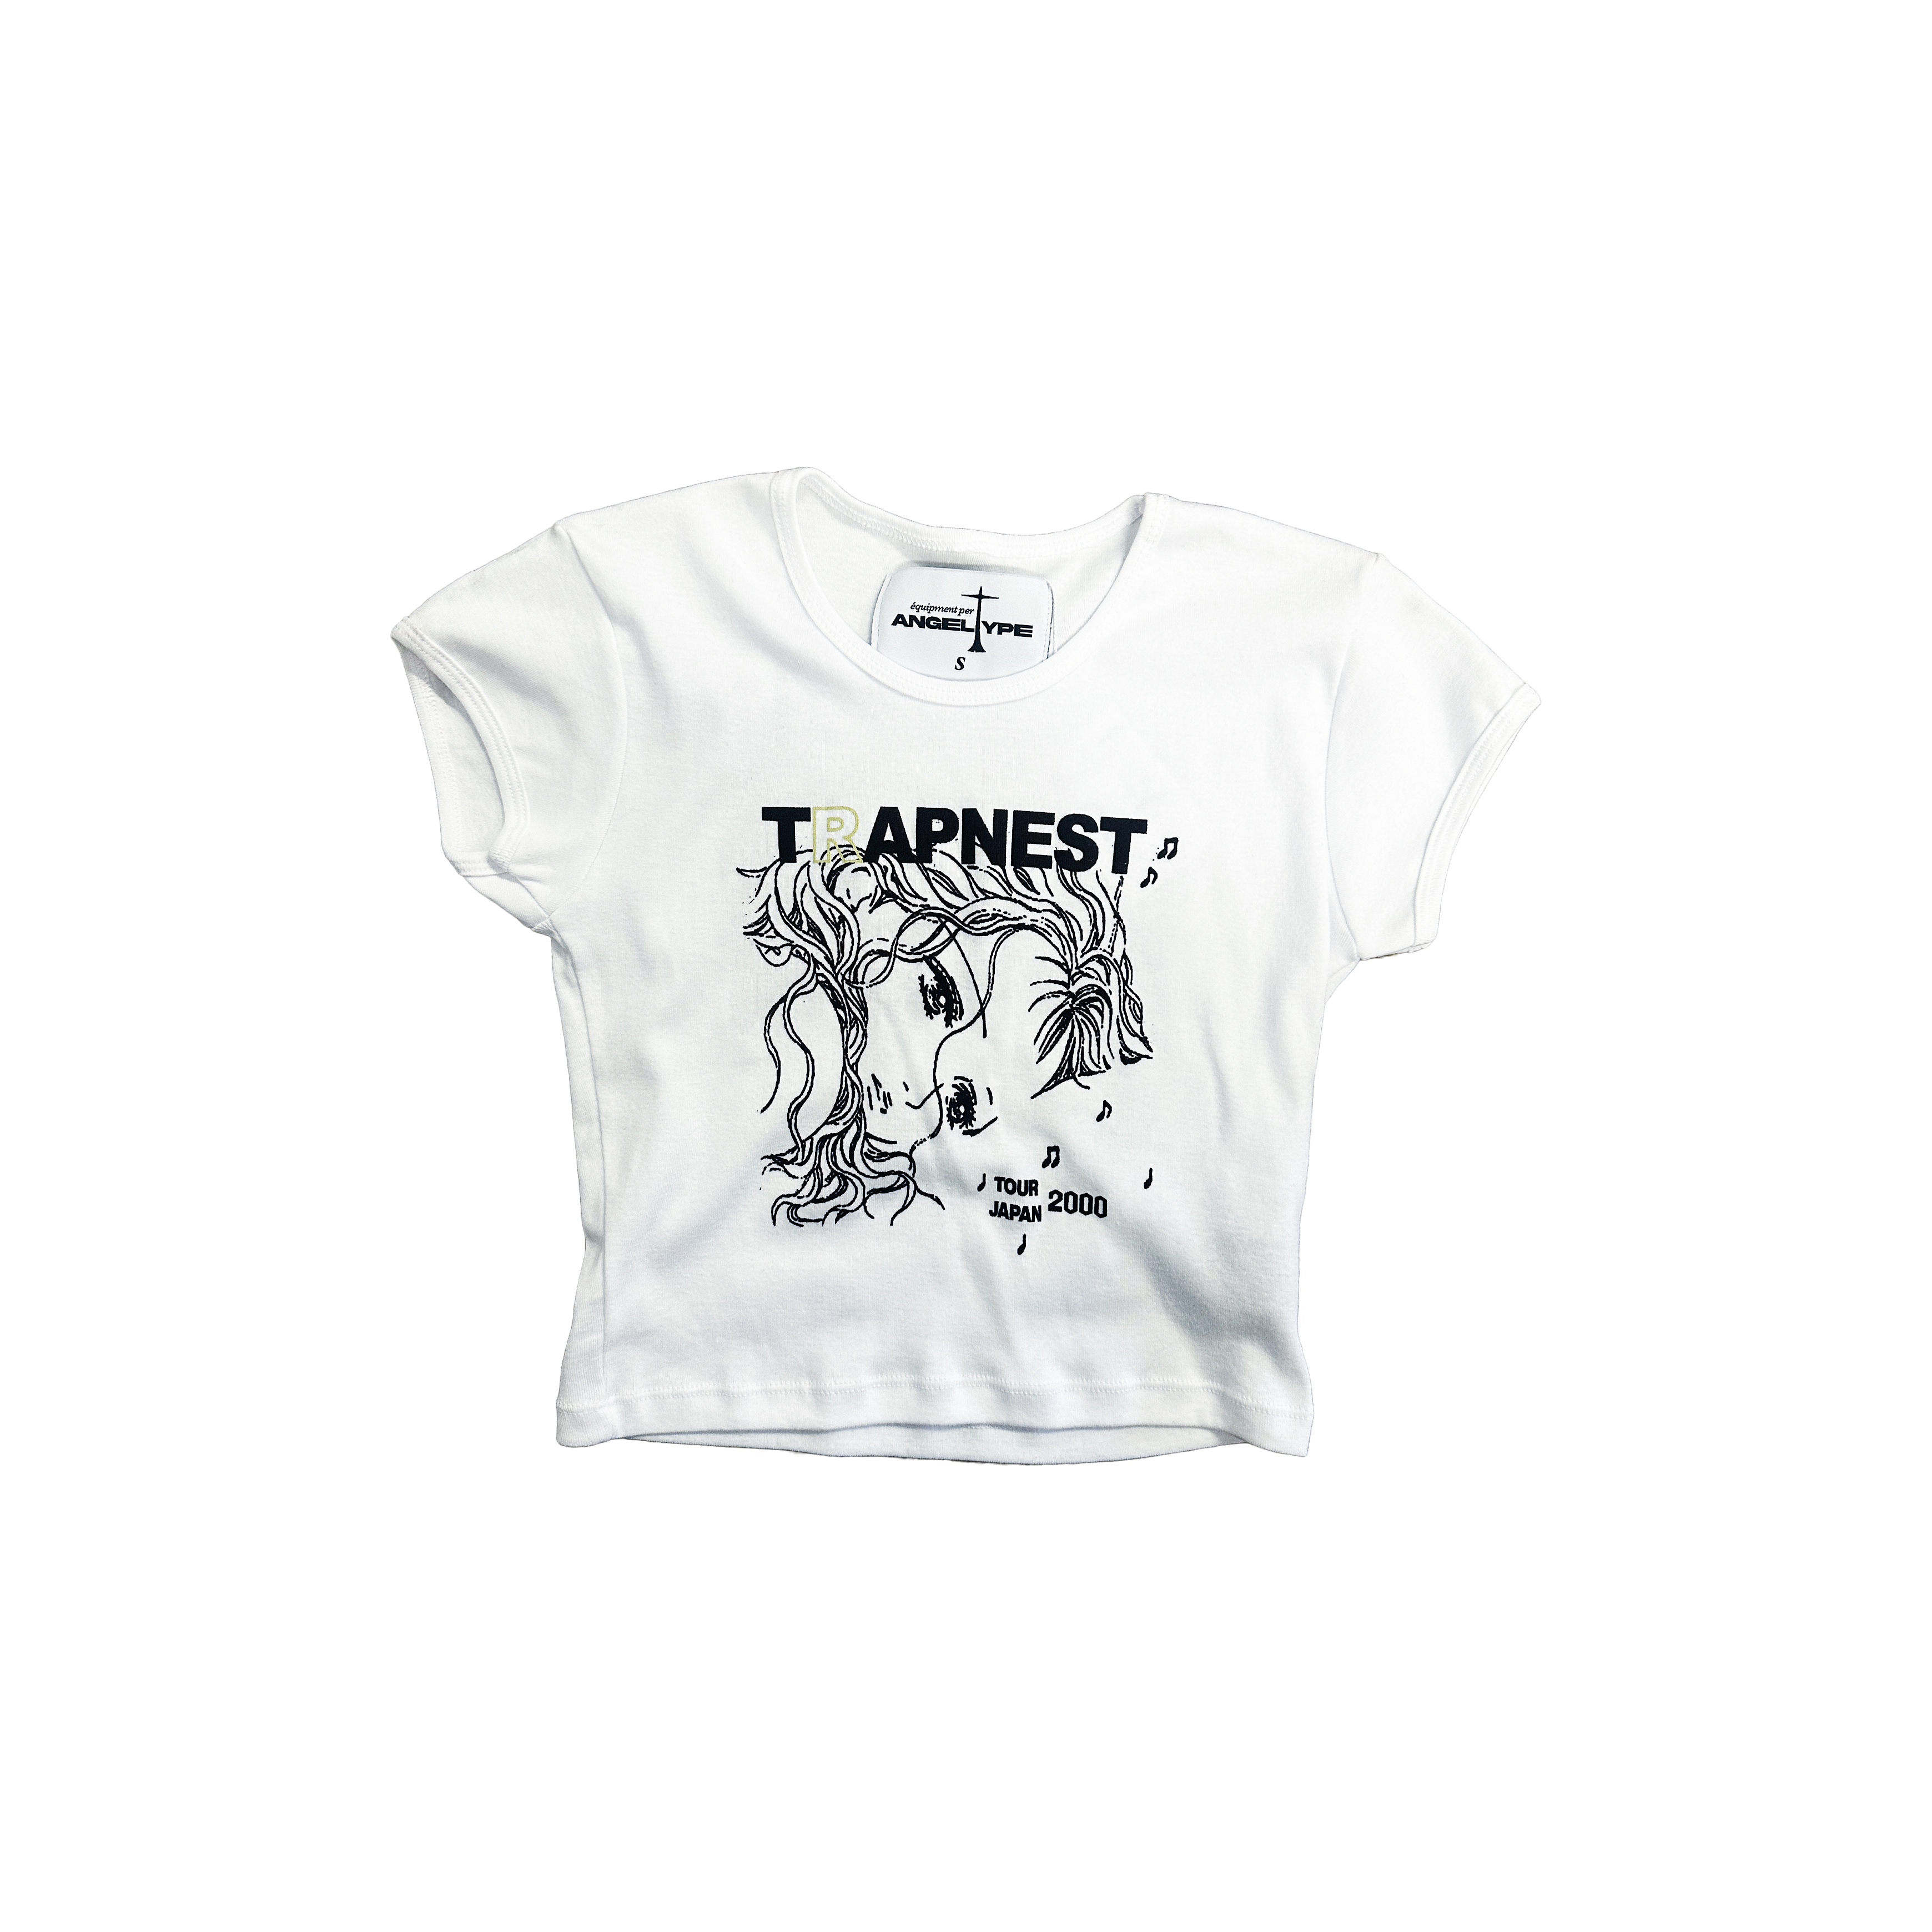 TRAPNEST 2000 TOUR BABY TEE